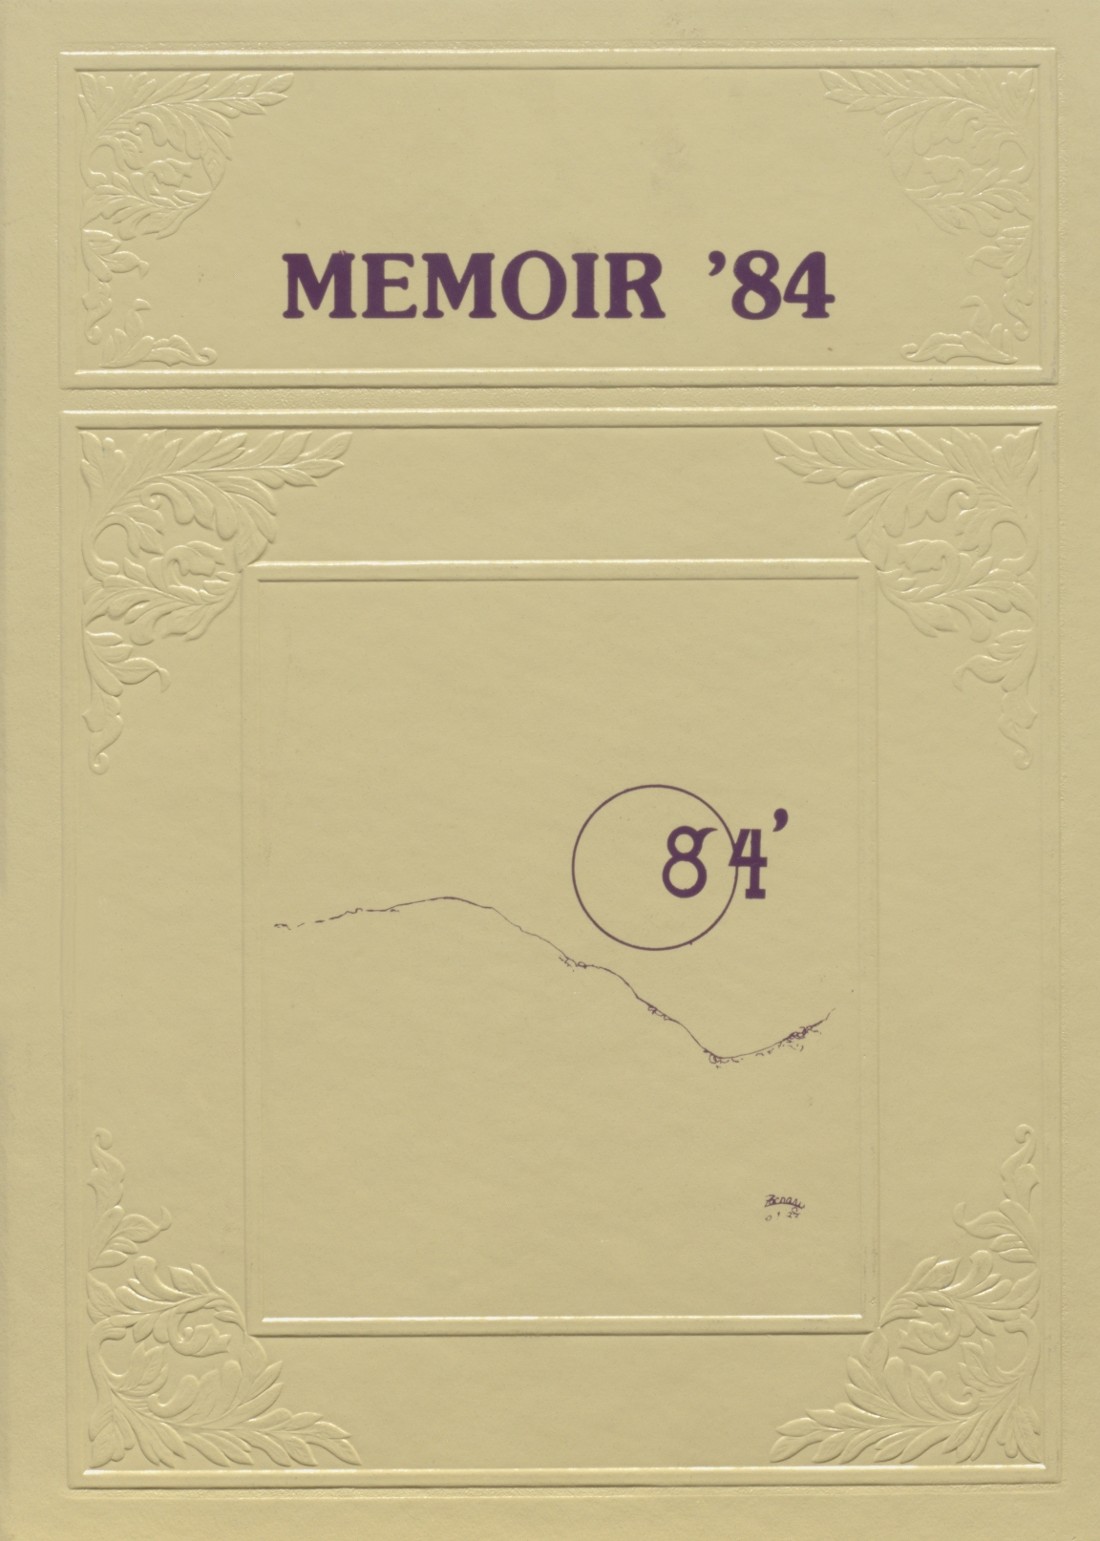 1984 yearbook from Berne-Knox-Westerlo High School from Berne, New York ...